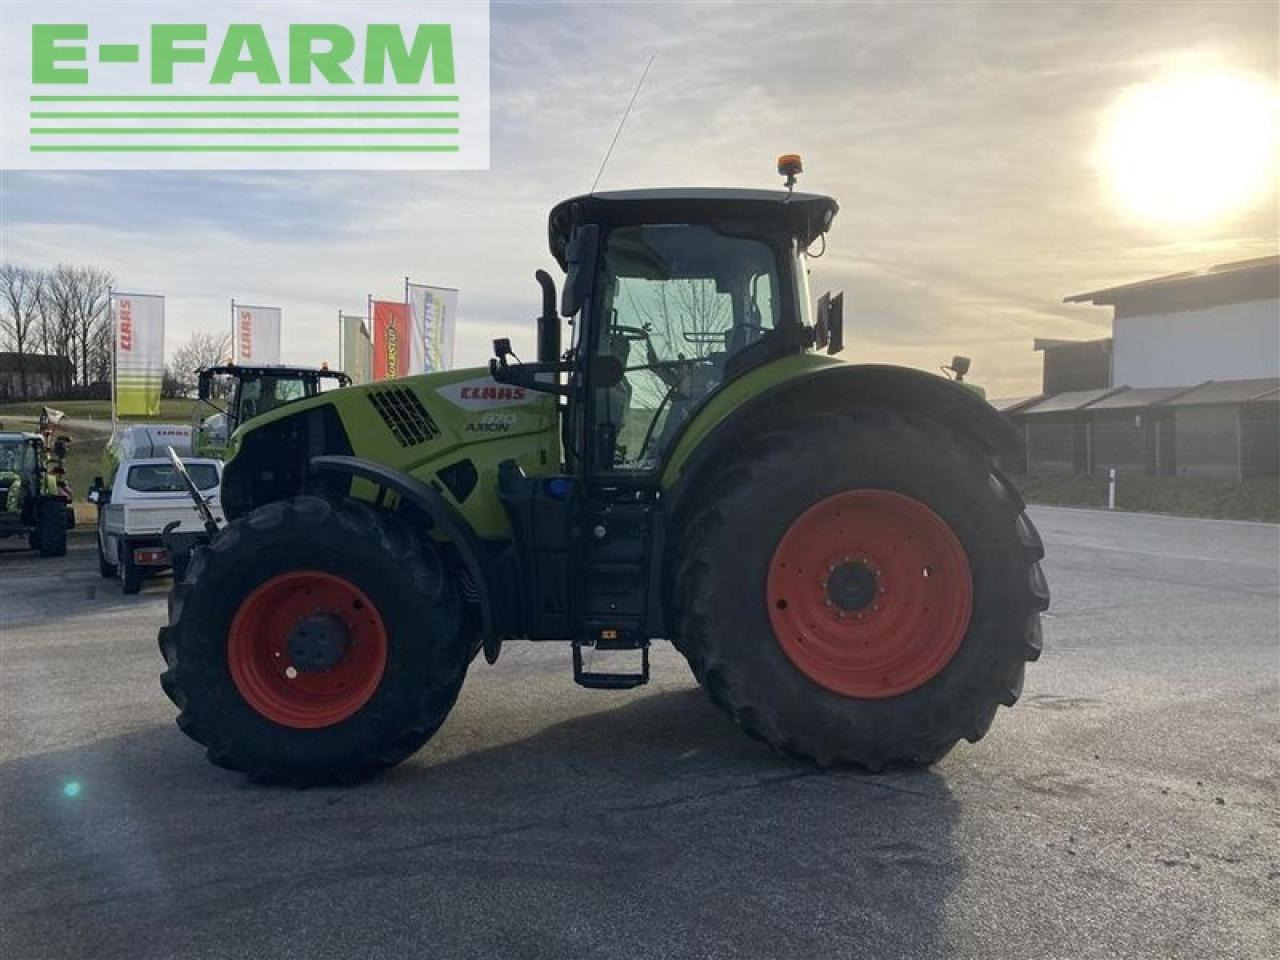 Tractor CLAAS axion 870 cmatic - stage v